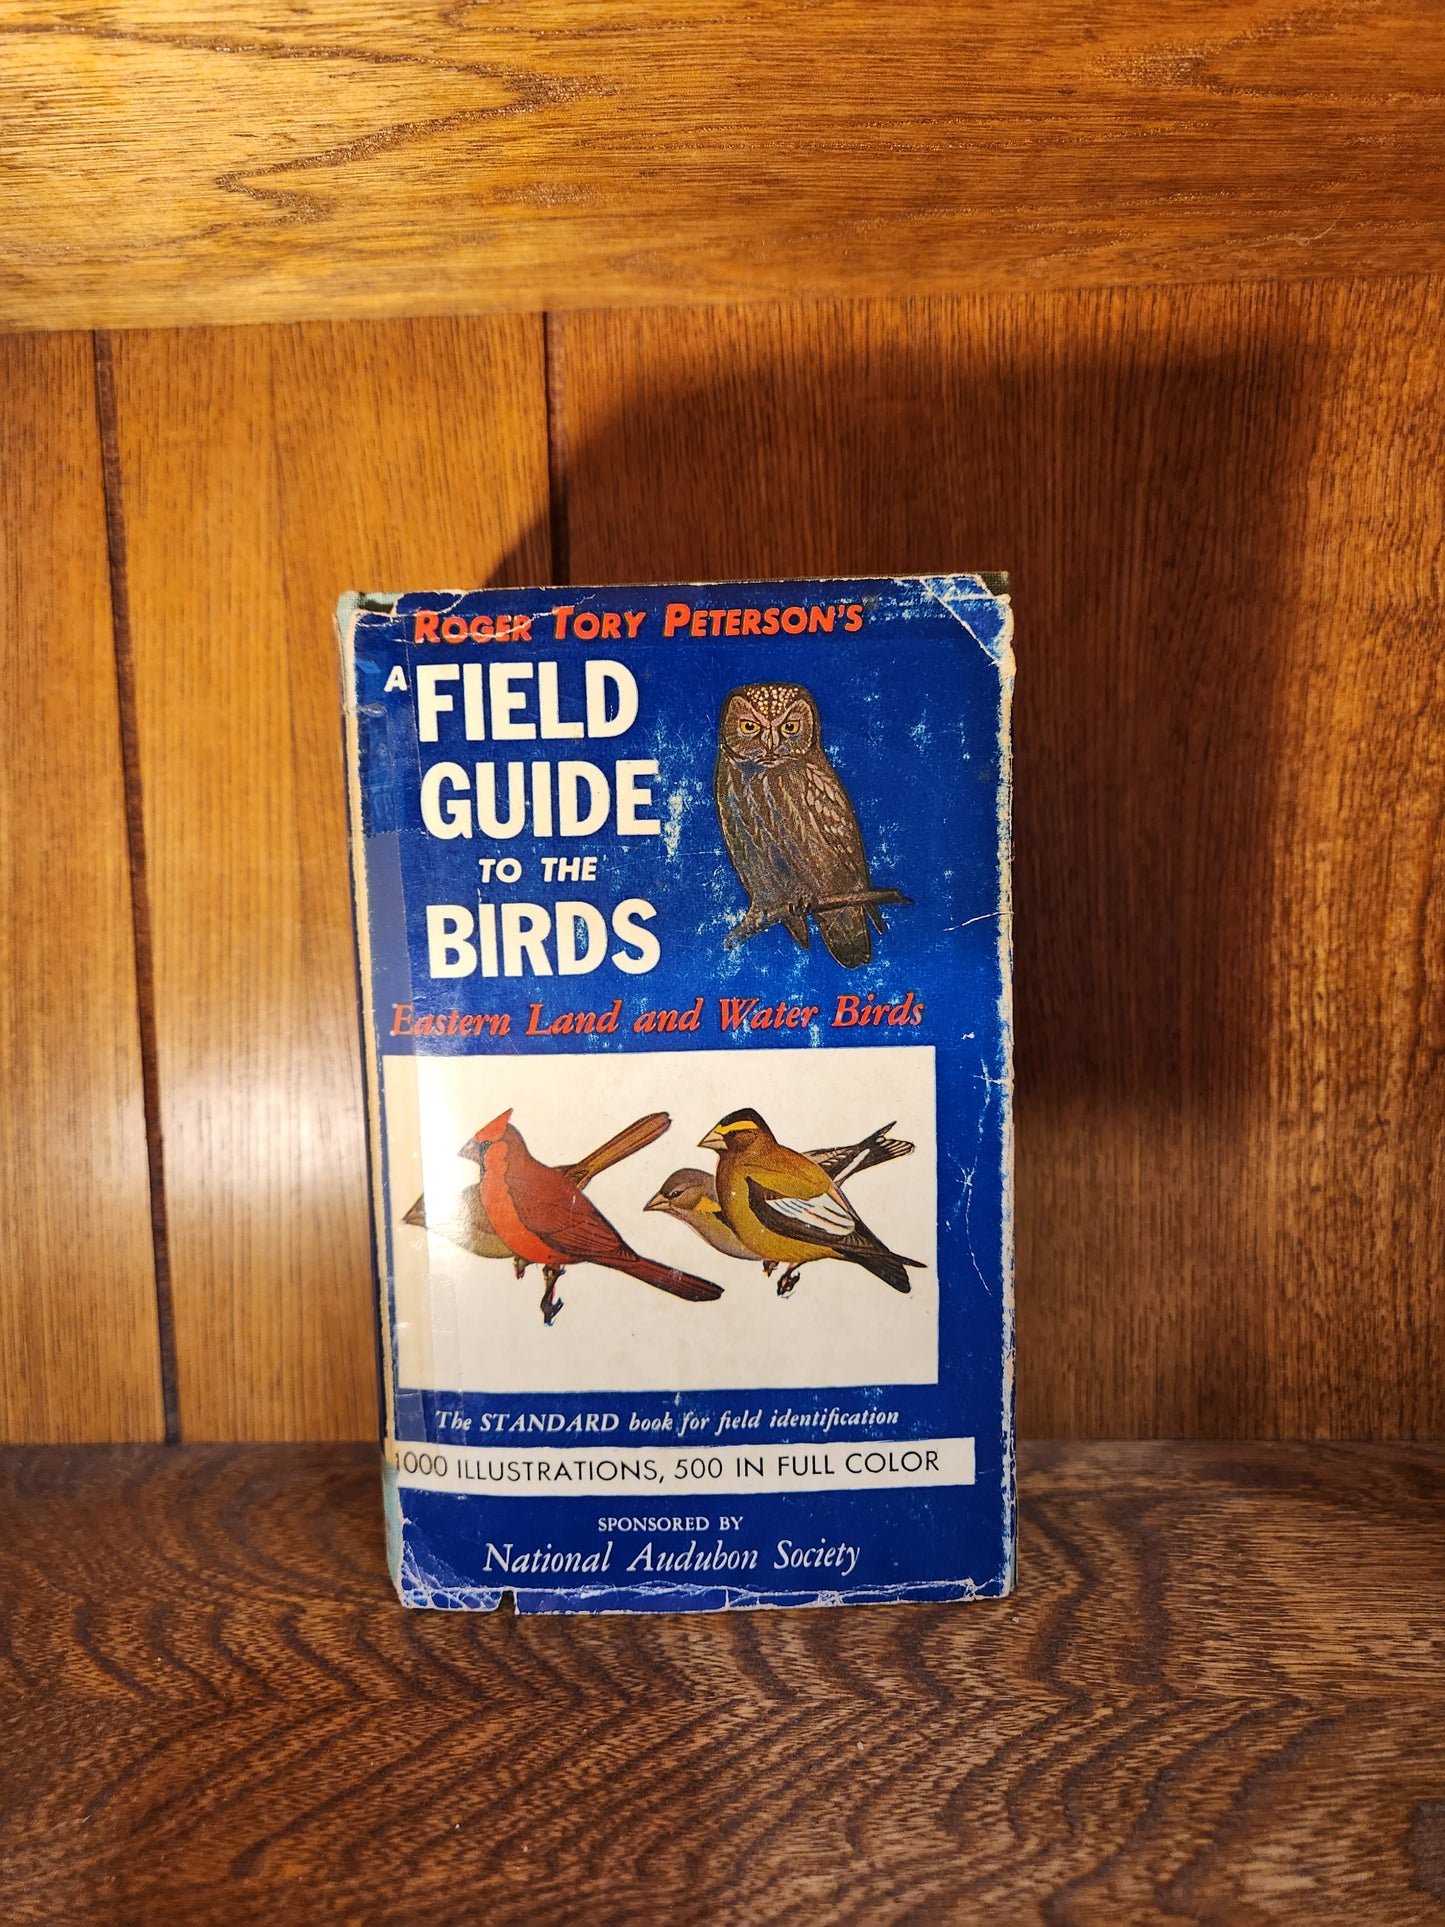 Roger Tory Peterson's A Field Guide to the Birds Eastern Land and Water Birds